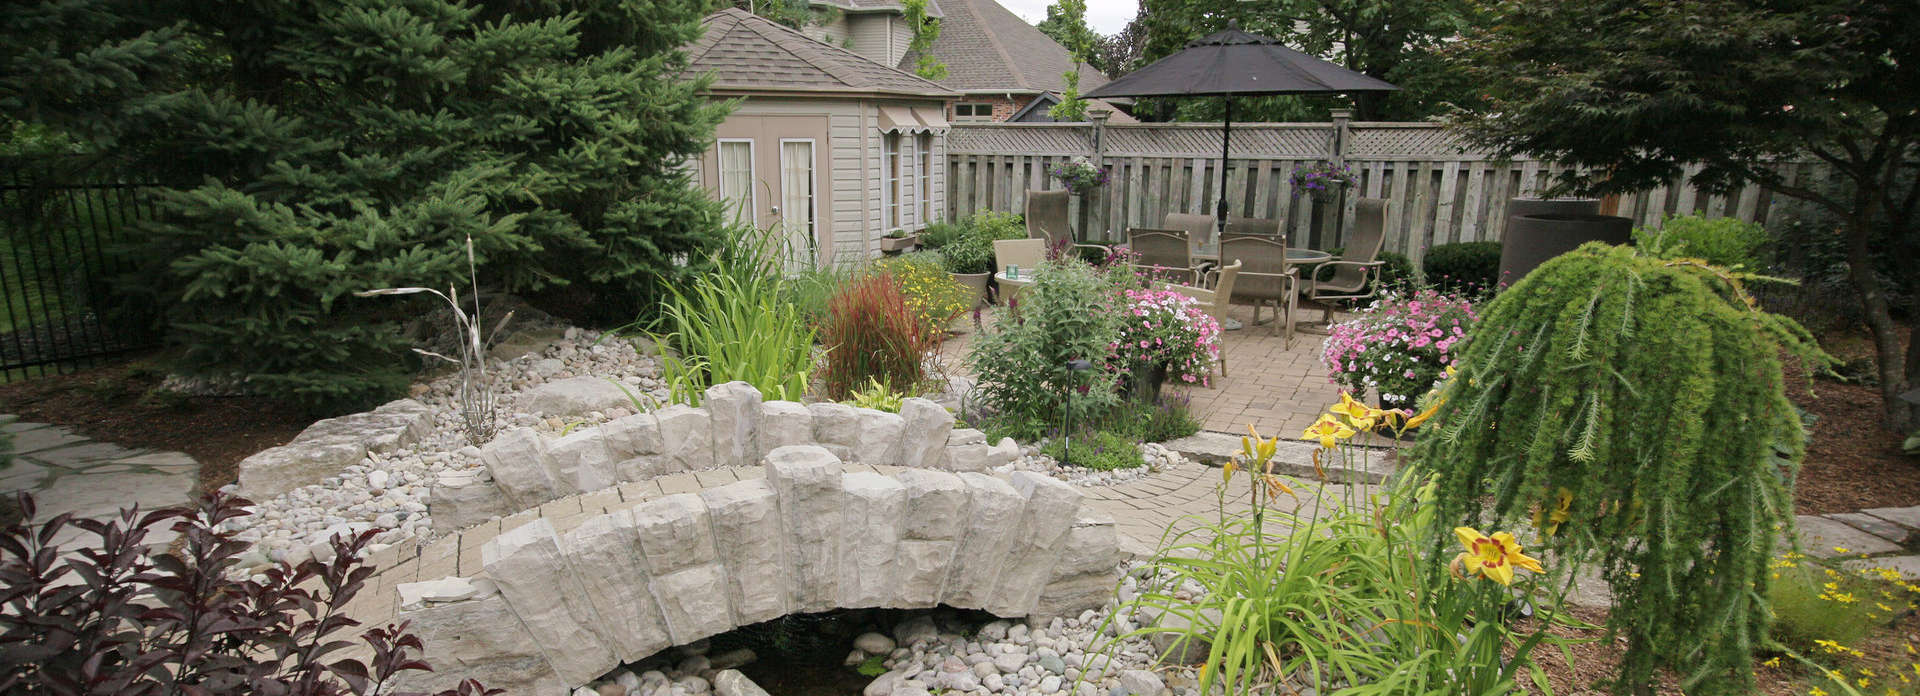 Stone bridge, stone wall, and garden sculpture project in London Ontario